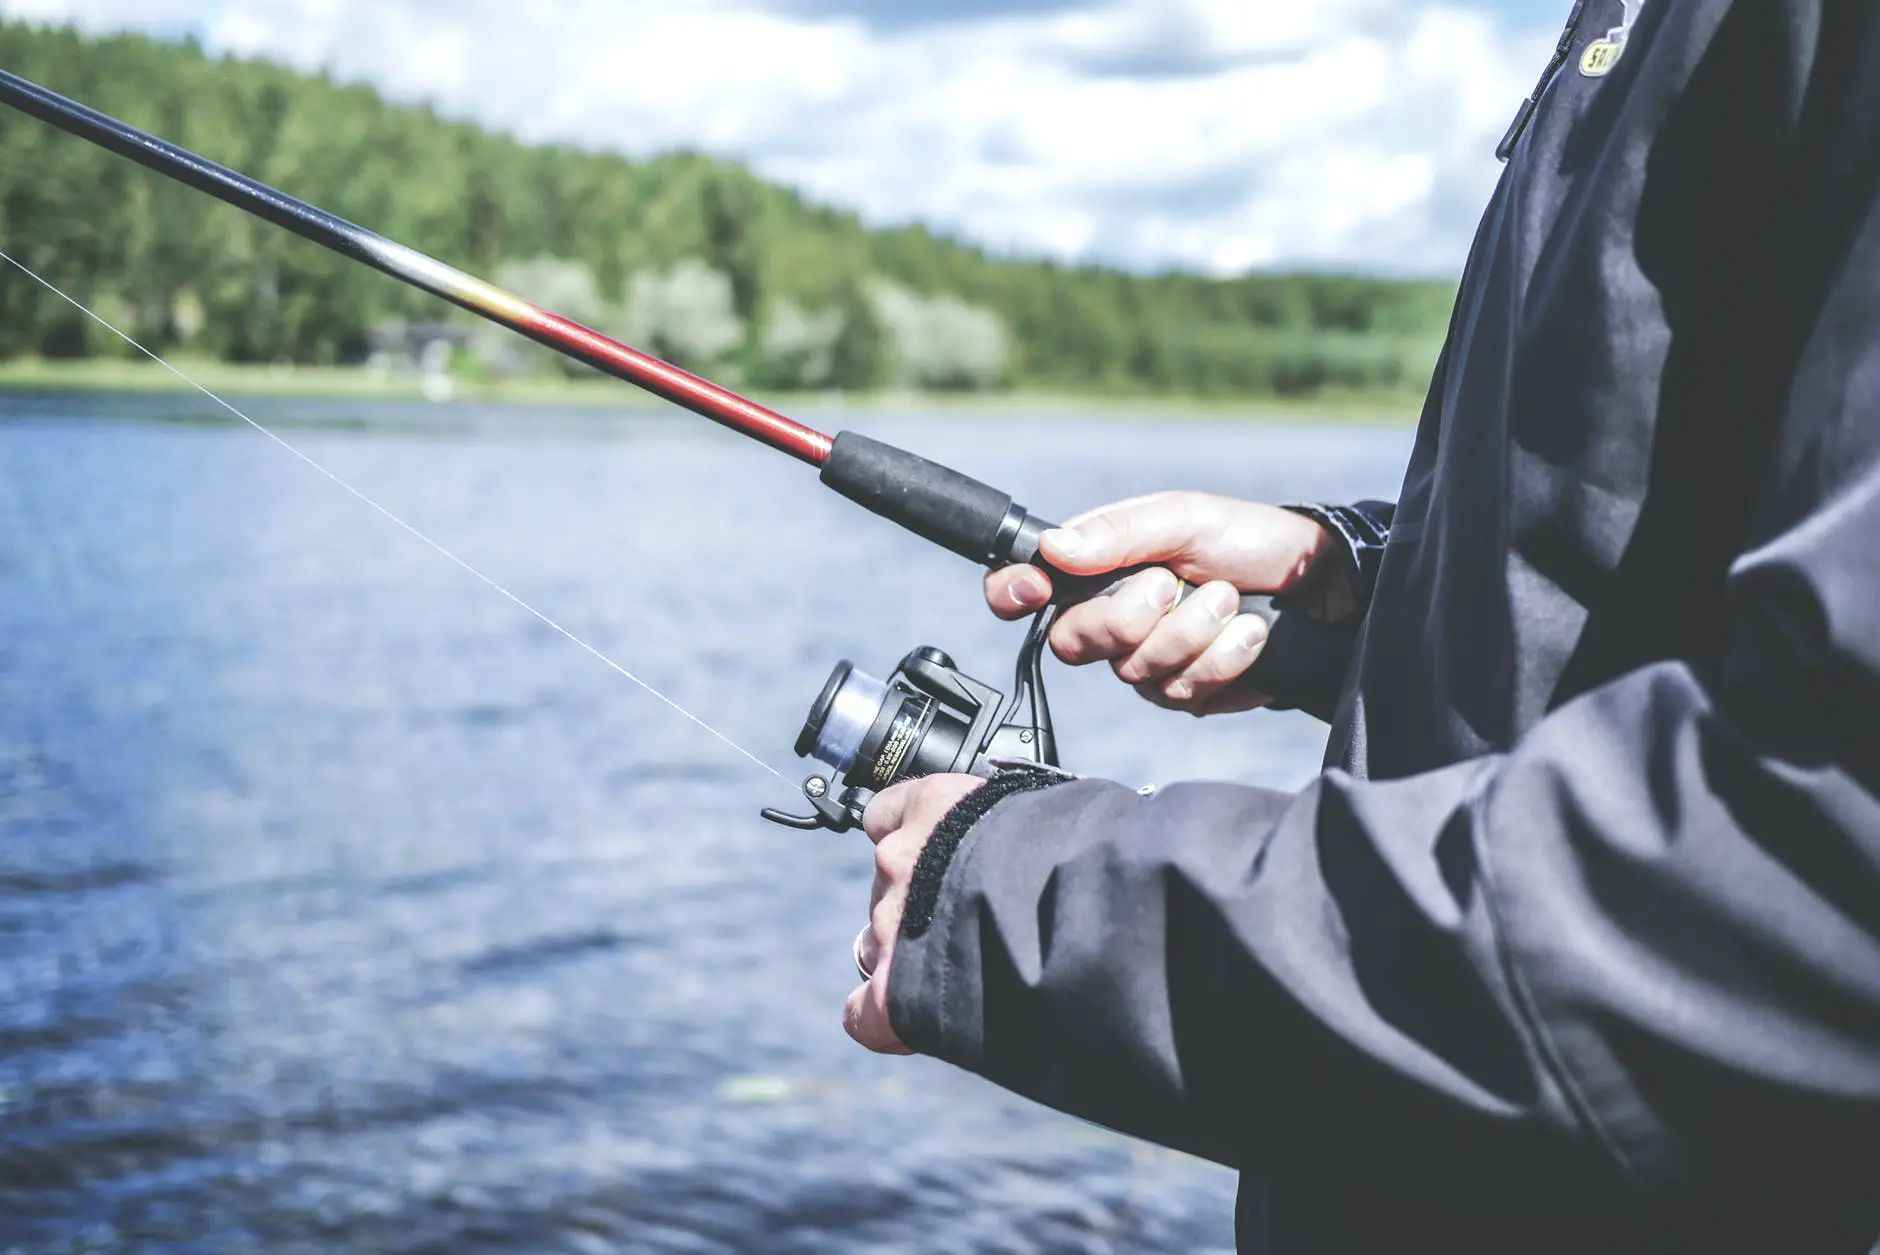 How To Clean Fishing Rods And Reels?